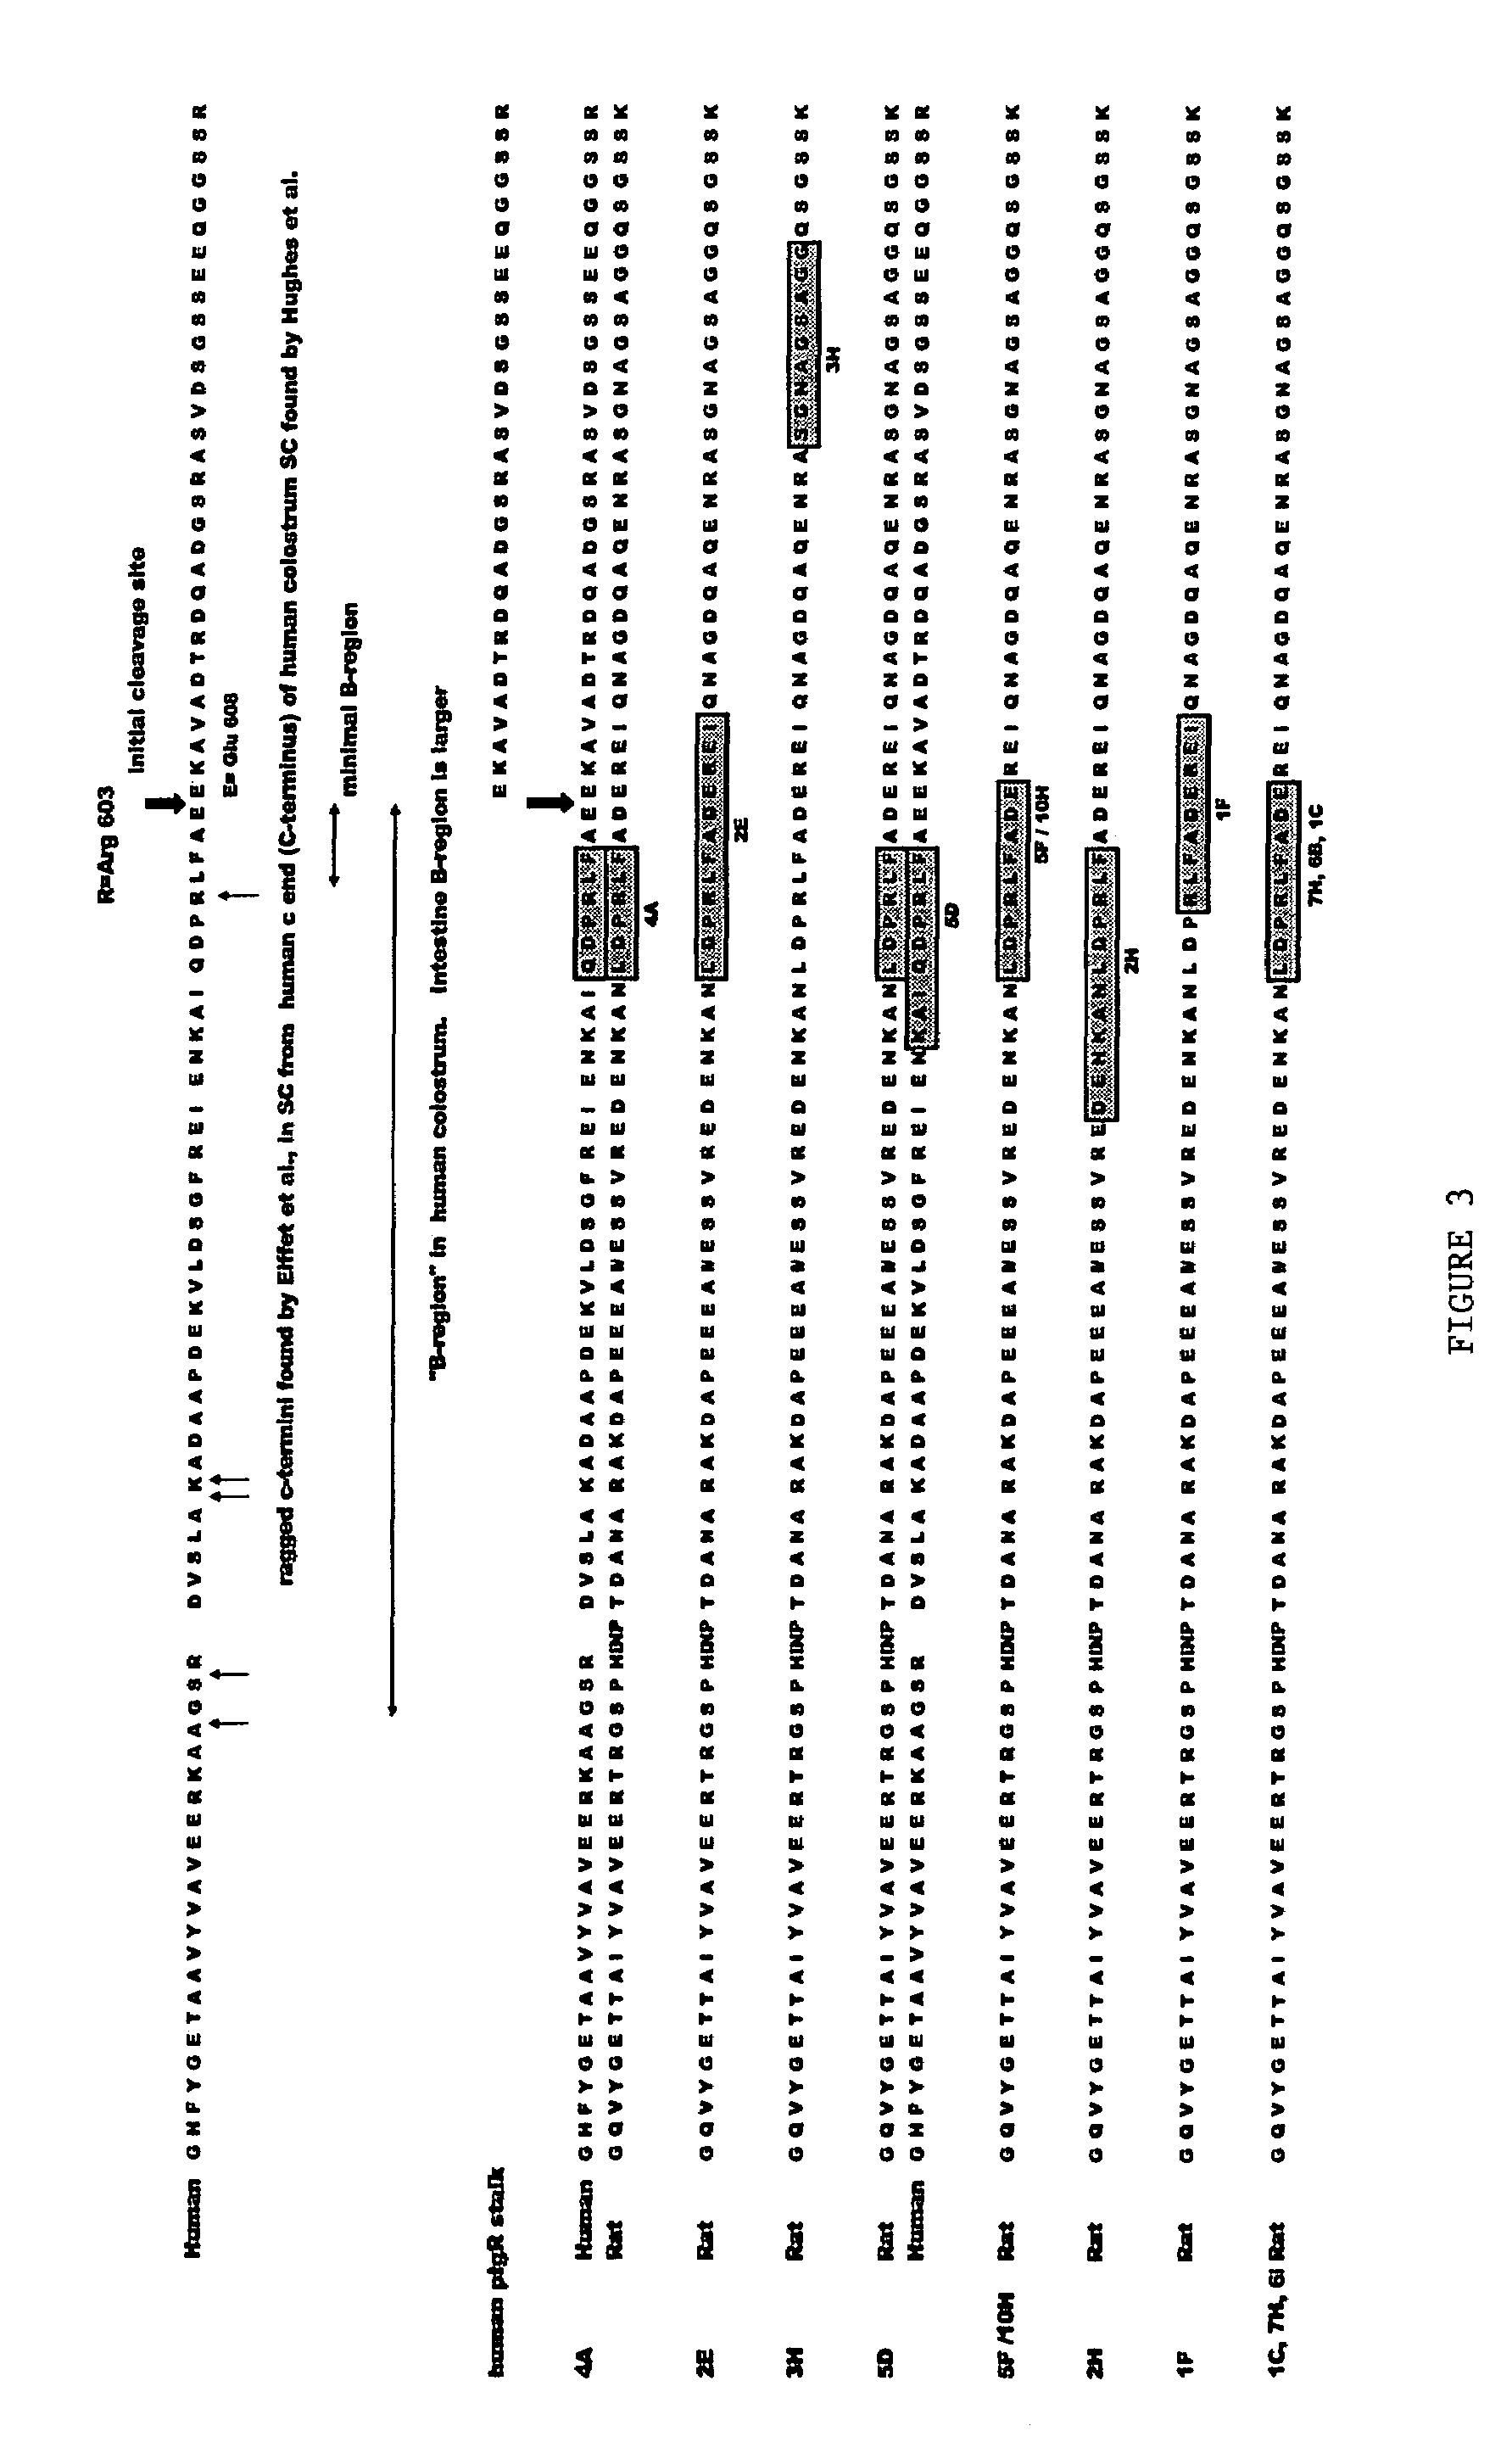 Methods of targeting agents to cells expressing the polymeric immunoglobulin receptor